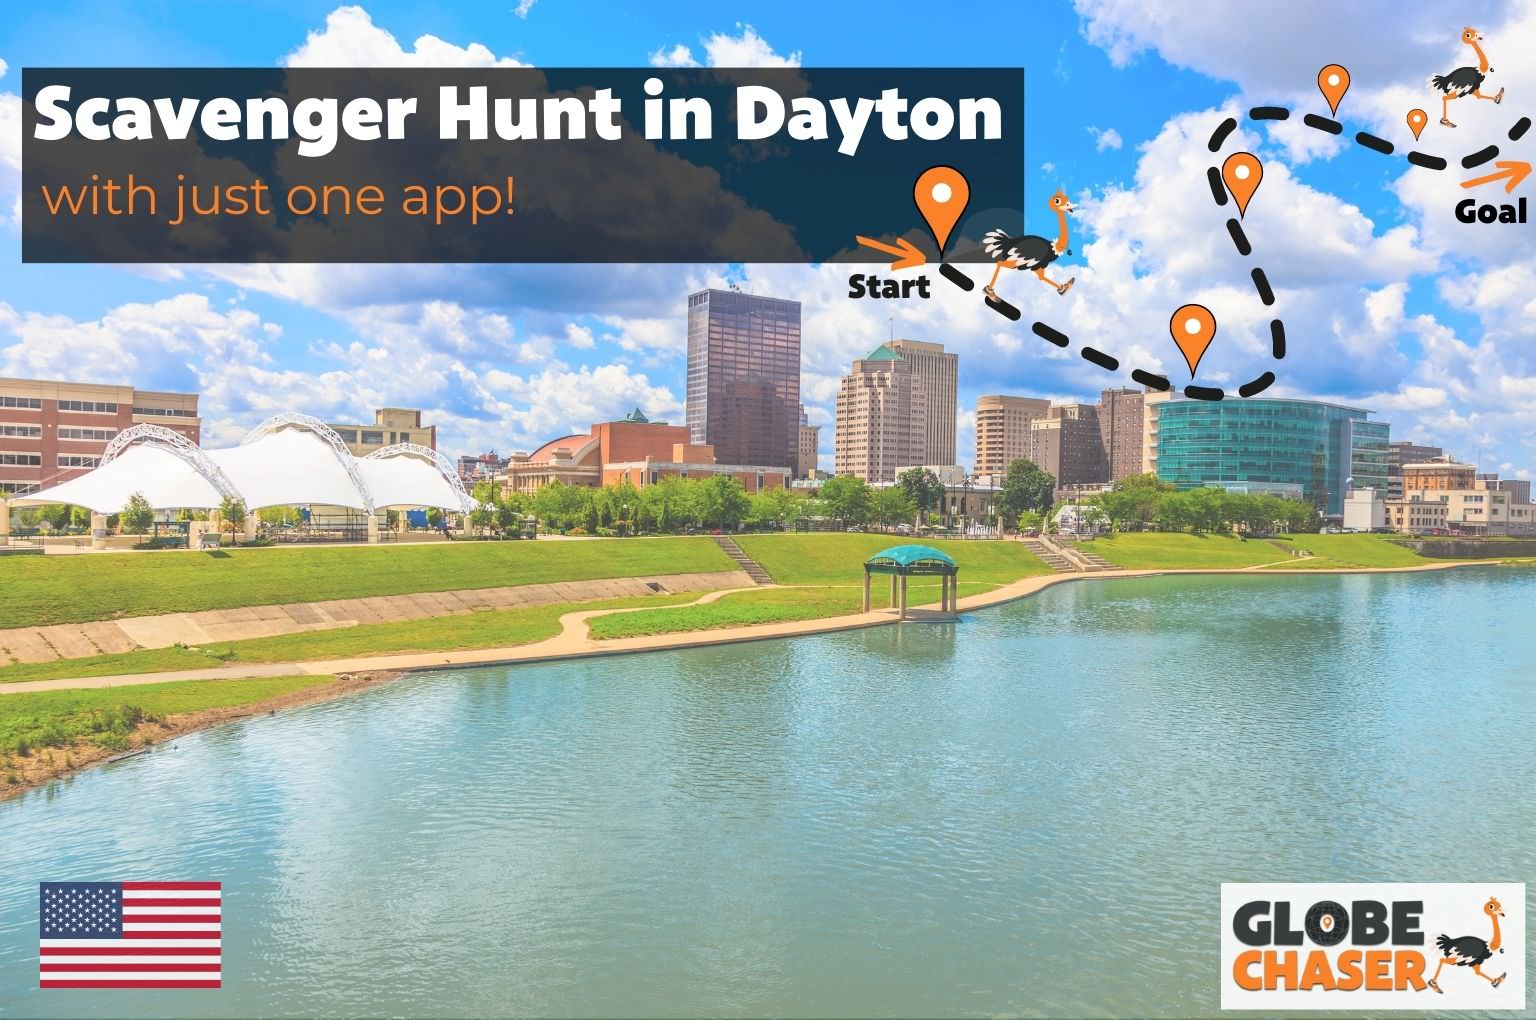 Scavenger Hunt in Dayton, USA - Family Activities with the Globe Chaser App for Outdoor Fun